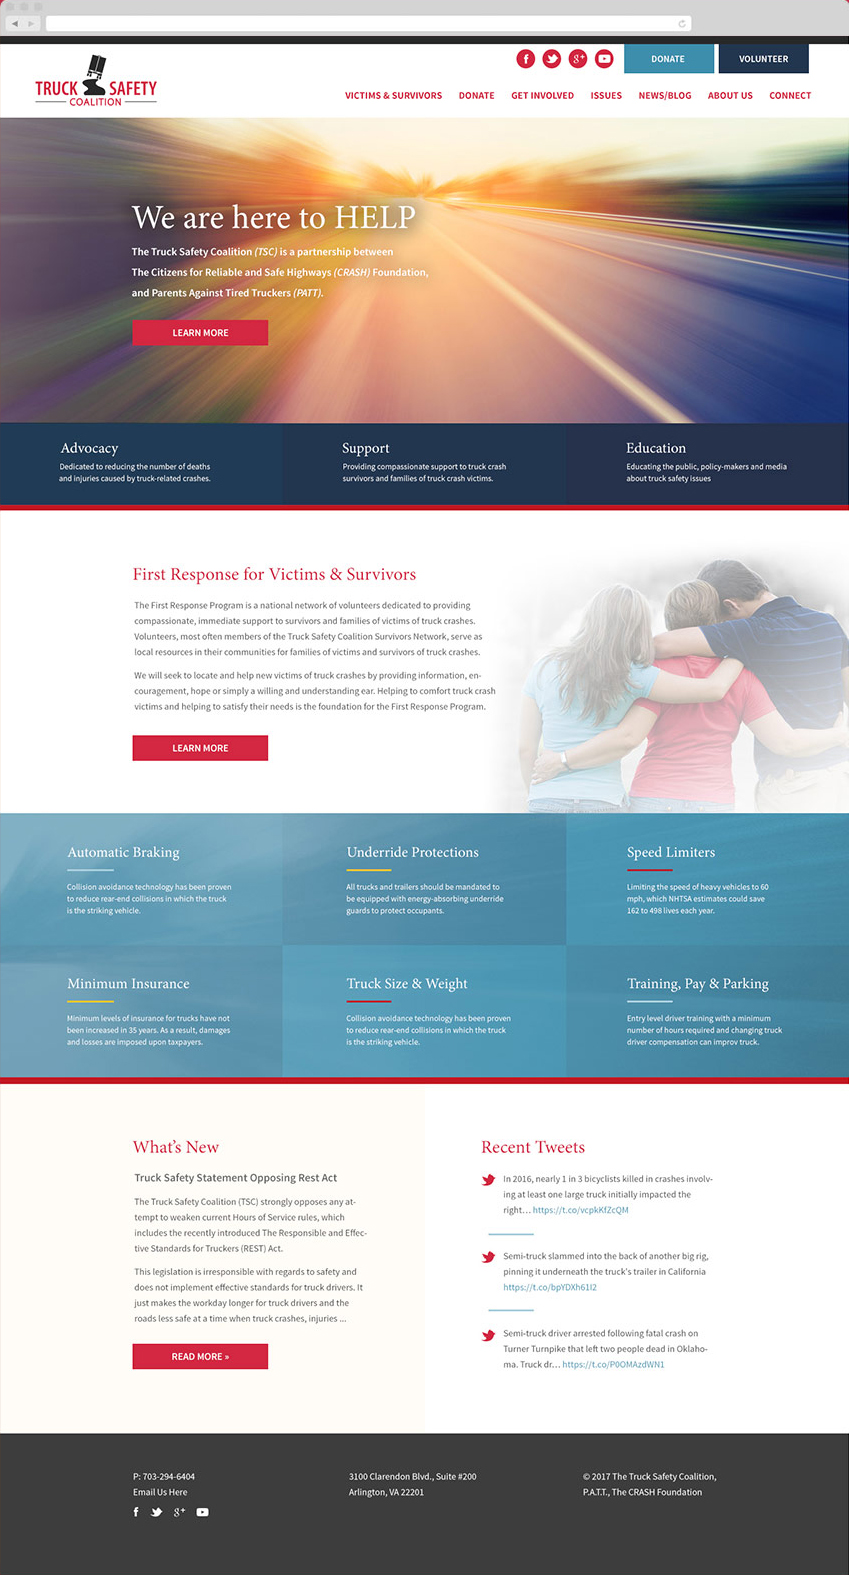 The Truck Safety home page website design by Blenderhouse Creative